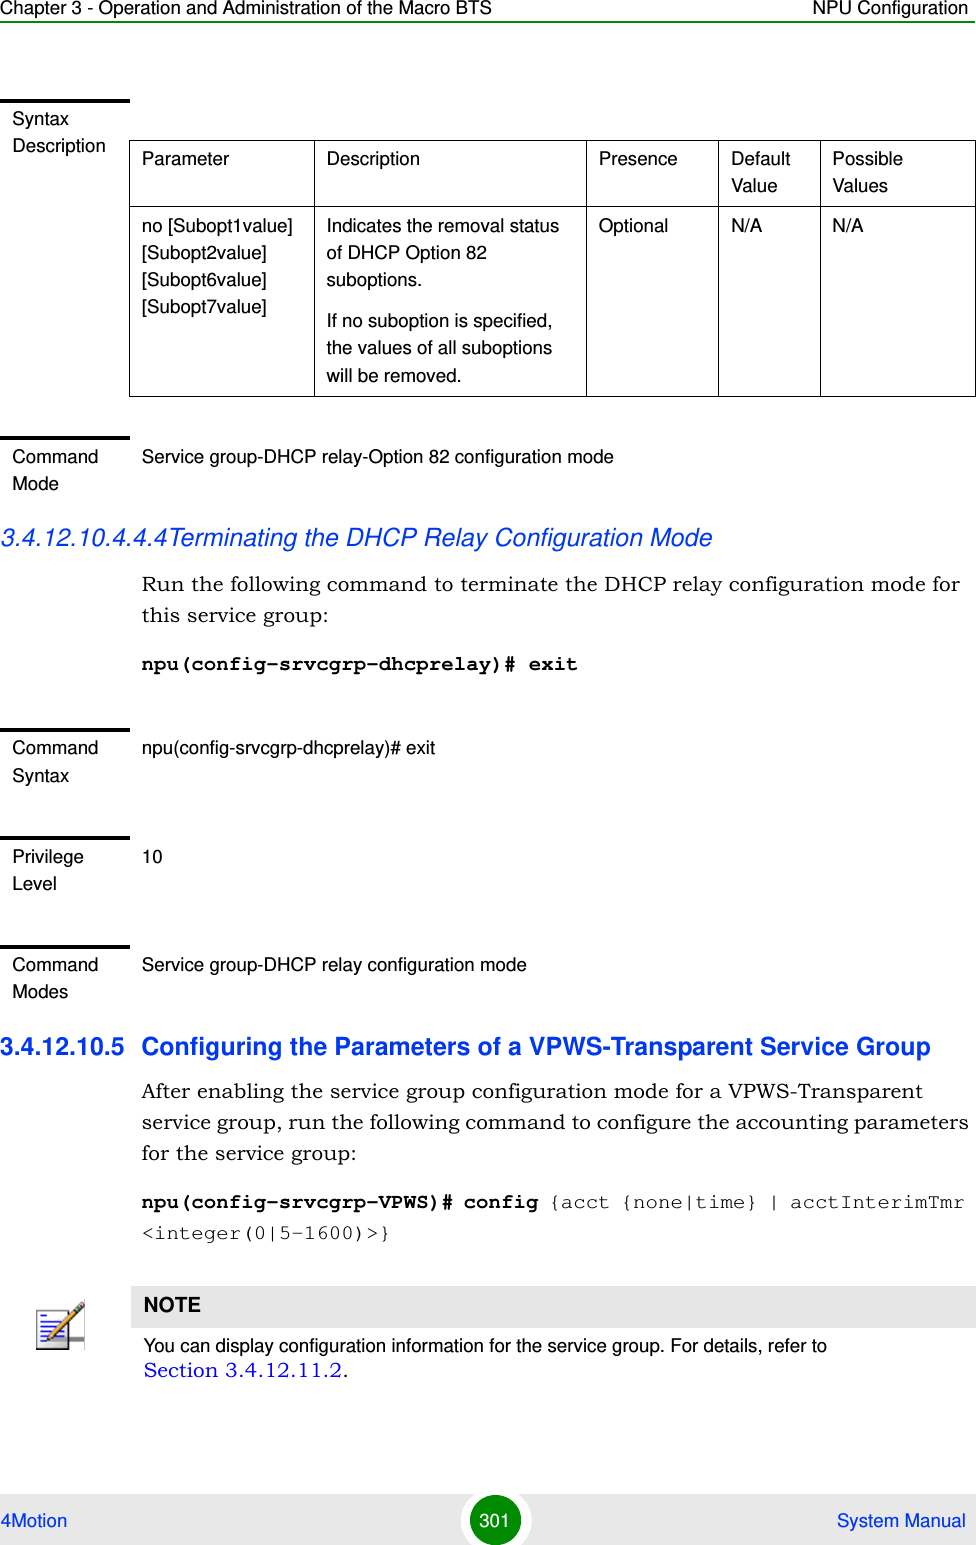 Chapter 3 - Operation and Administration of the Macro BTS NPU Configuration4Motion 301  System Manual3.4.12.10.4.4.4Terminating the DHCP Relay Configuration ModeRun the following command to terminate the DHCP relay configuration mode for this service group: npu(config-srvcgrp-dhcprelay)# exit3.4.12.10.5 Configuring the Parameters of a VPWS-Transparent Service GroupAfter enabling the service group configuration mode for a VPWS-Transparent service group, run the following command to configure the accounting parameters for the service group:npu(config-srvcgrp-VPWS)# config {acct {none|time} | acctInterimTmr &lt;integer(0|5-1600)&gt;}Syntax Description Parameter Description Presence Default ValuePossible Valuesno [Subopt1value] [Subopt2value] [Subopt6value] [Subopt7value]Indicates the removal status of DHCP Option 82 suboptions.If no suboption is specified, the values of all suboptions will be removed.Optional N/A N/ACommand ModeService group-DHCP relay-Option 82 configuration modeCommand Syntaxnpu(config-srvcgrp-dhcprelay)# exitPrivilege Level10Command ModesService group-DHCP relay configuration modeNOTEYou can display configuration information for the service group. For details, refer to Section 3.4.12.11.2.